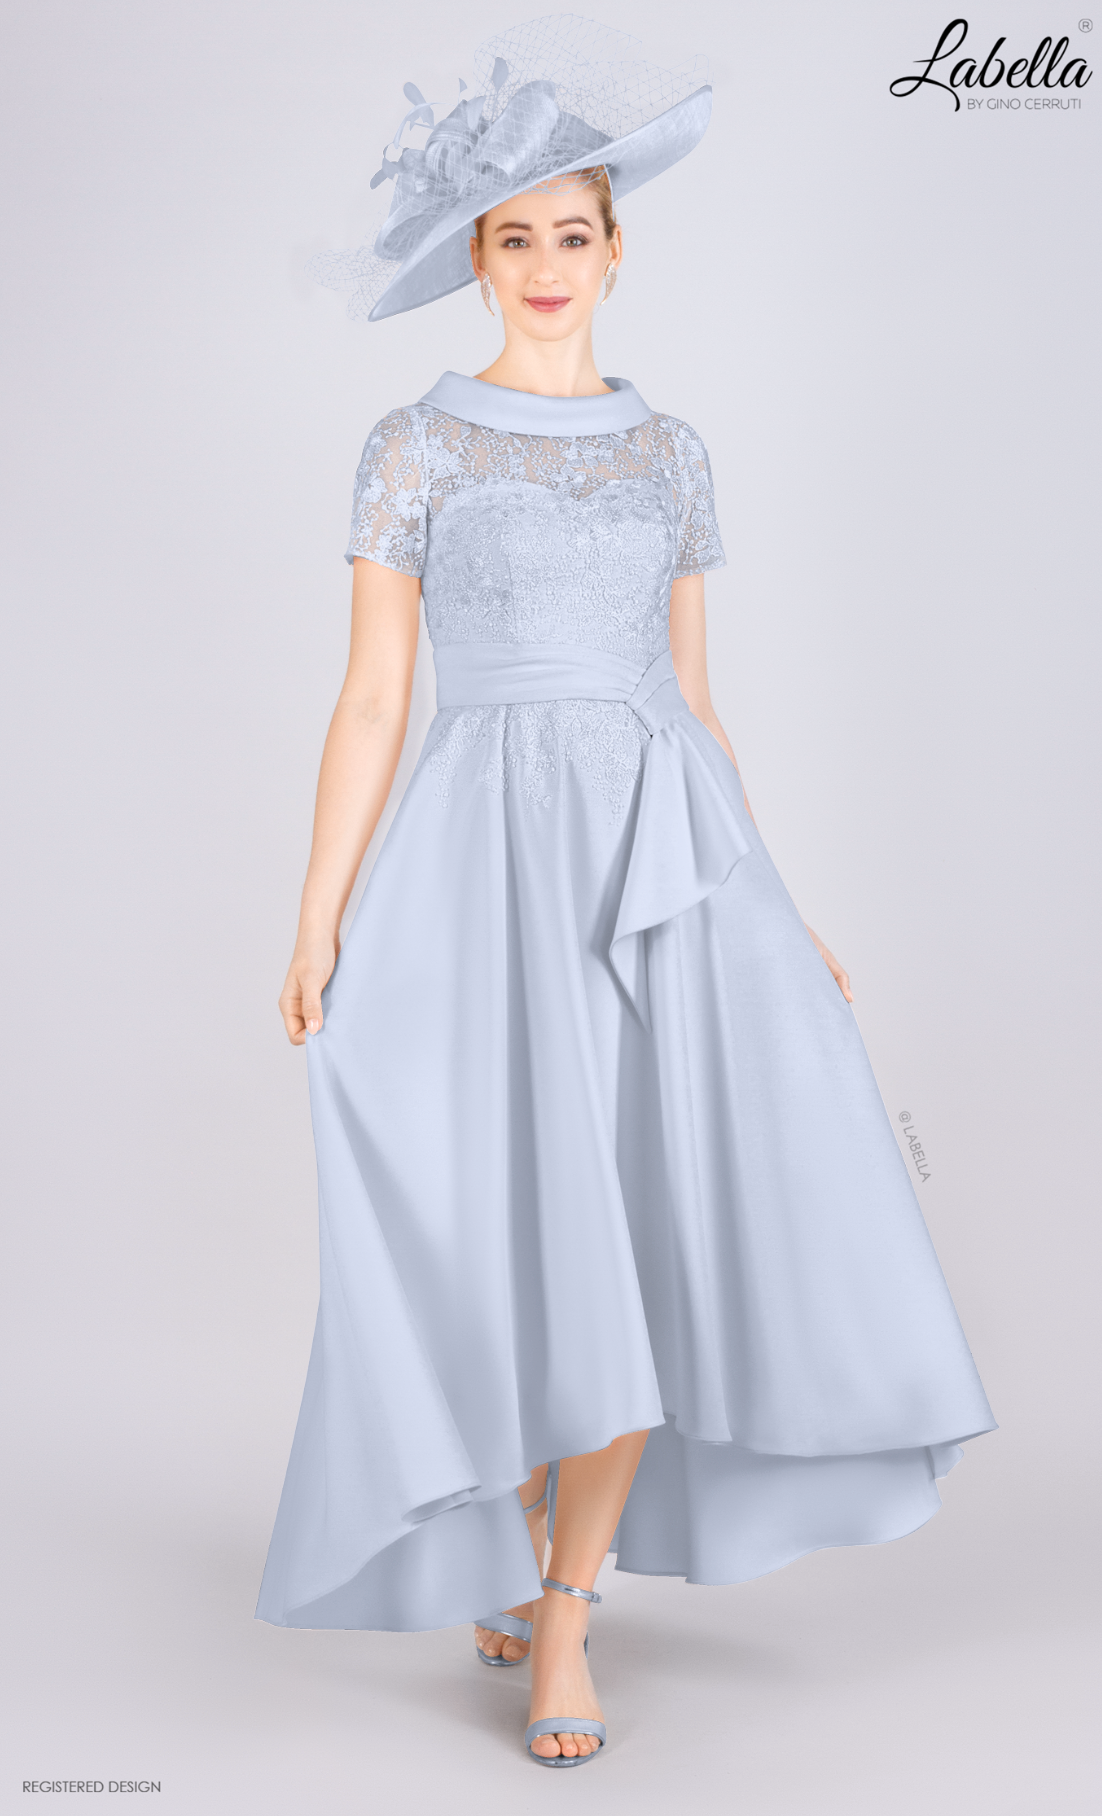 Light Blue Dress With Lace Detailing